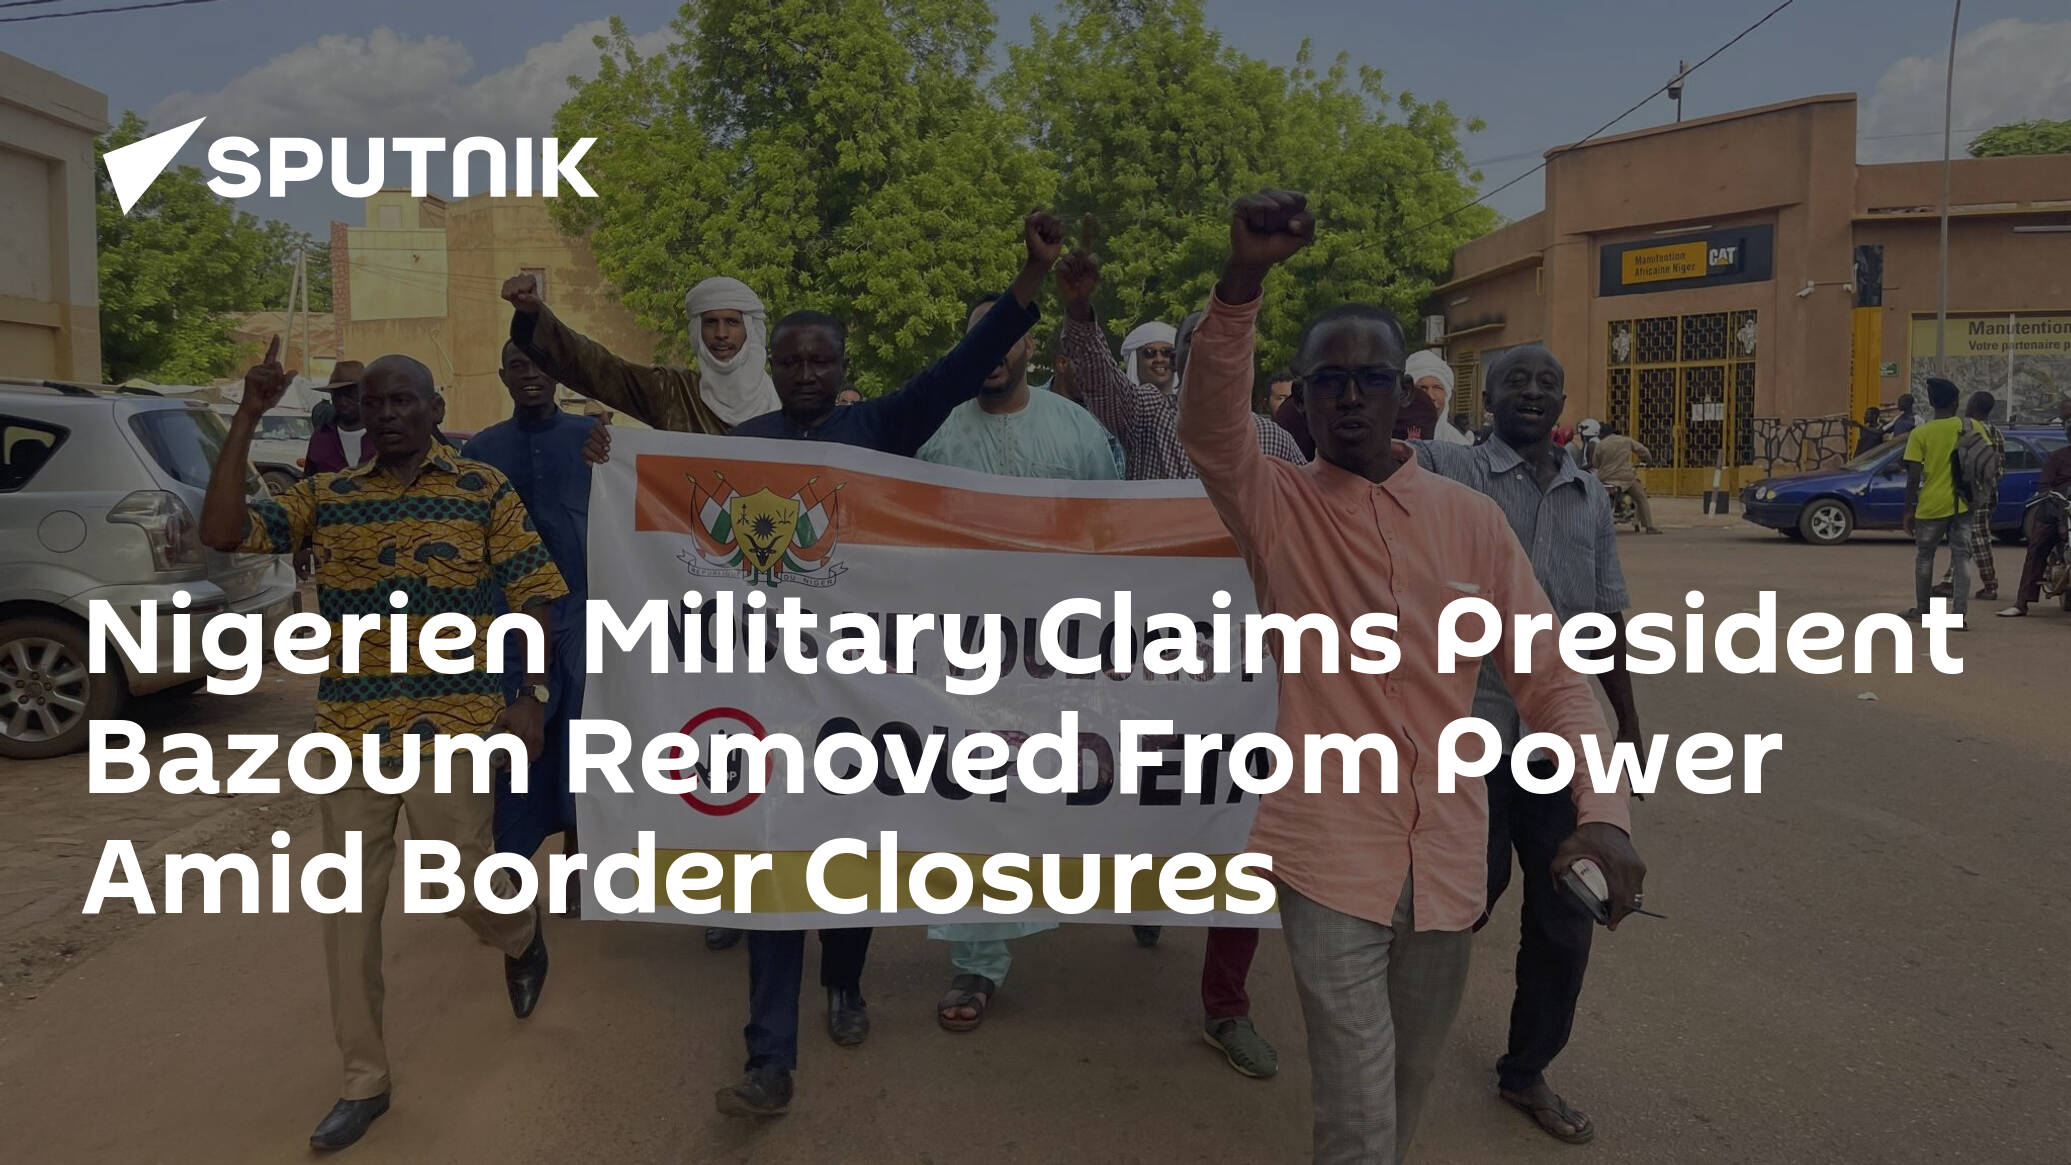 Nigerien Military Claims President Bazoum Removed From Power Amid Border Closures